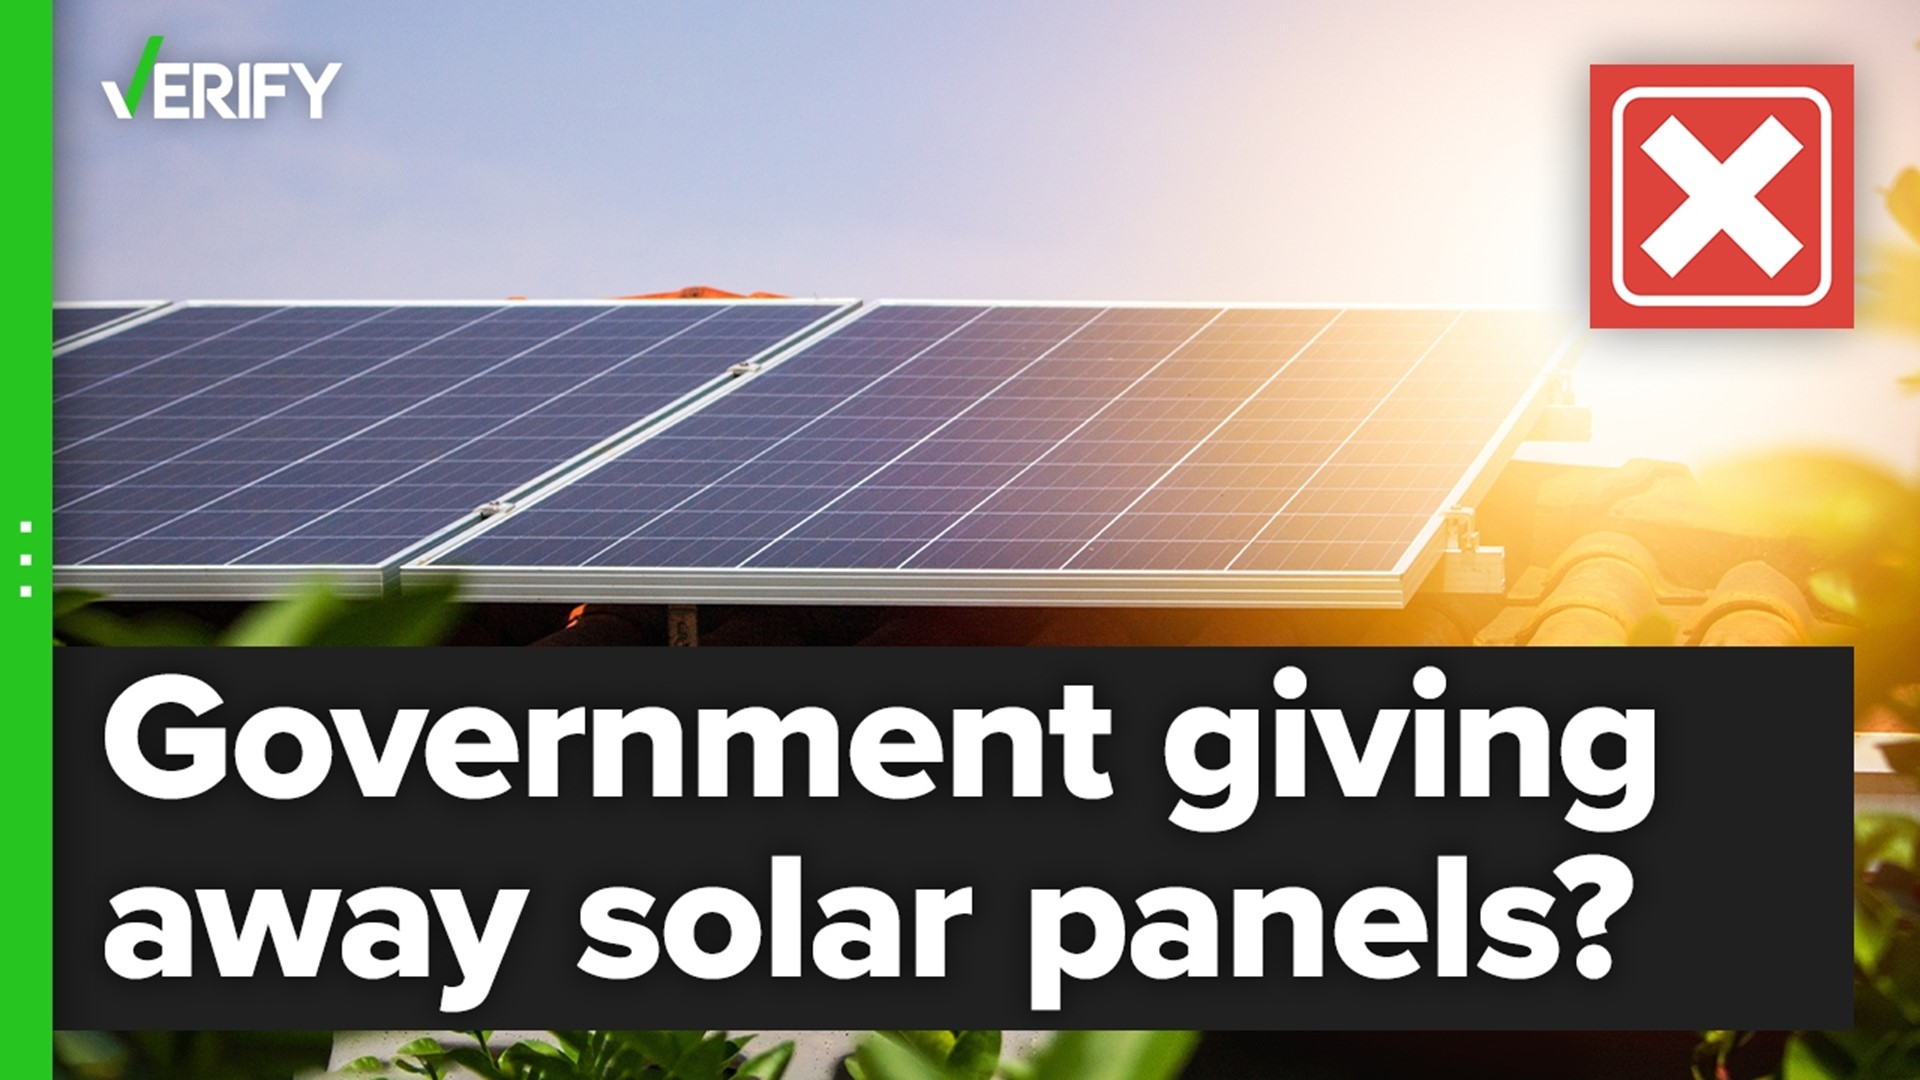 Is the federal government giving away free solar panels? The VERIFY team confirms this is false.